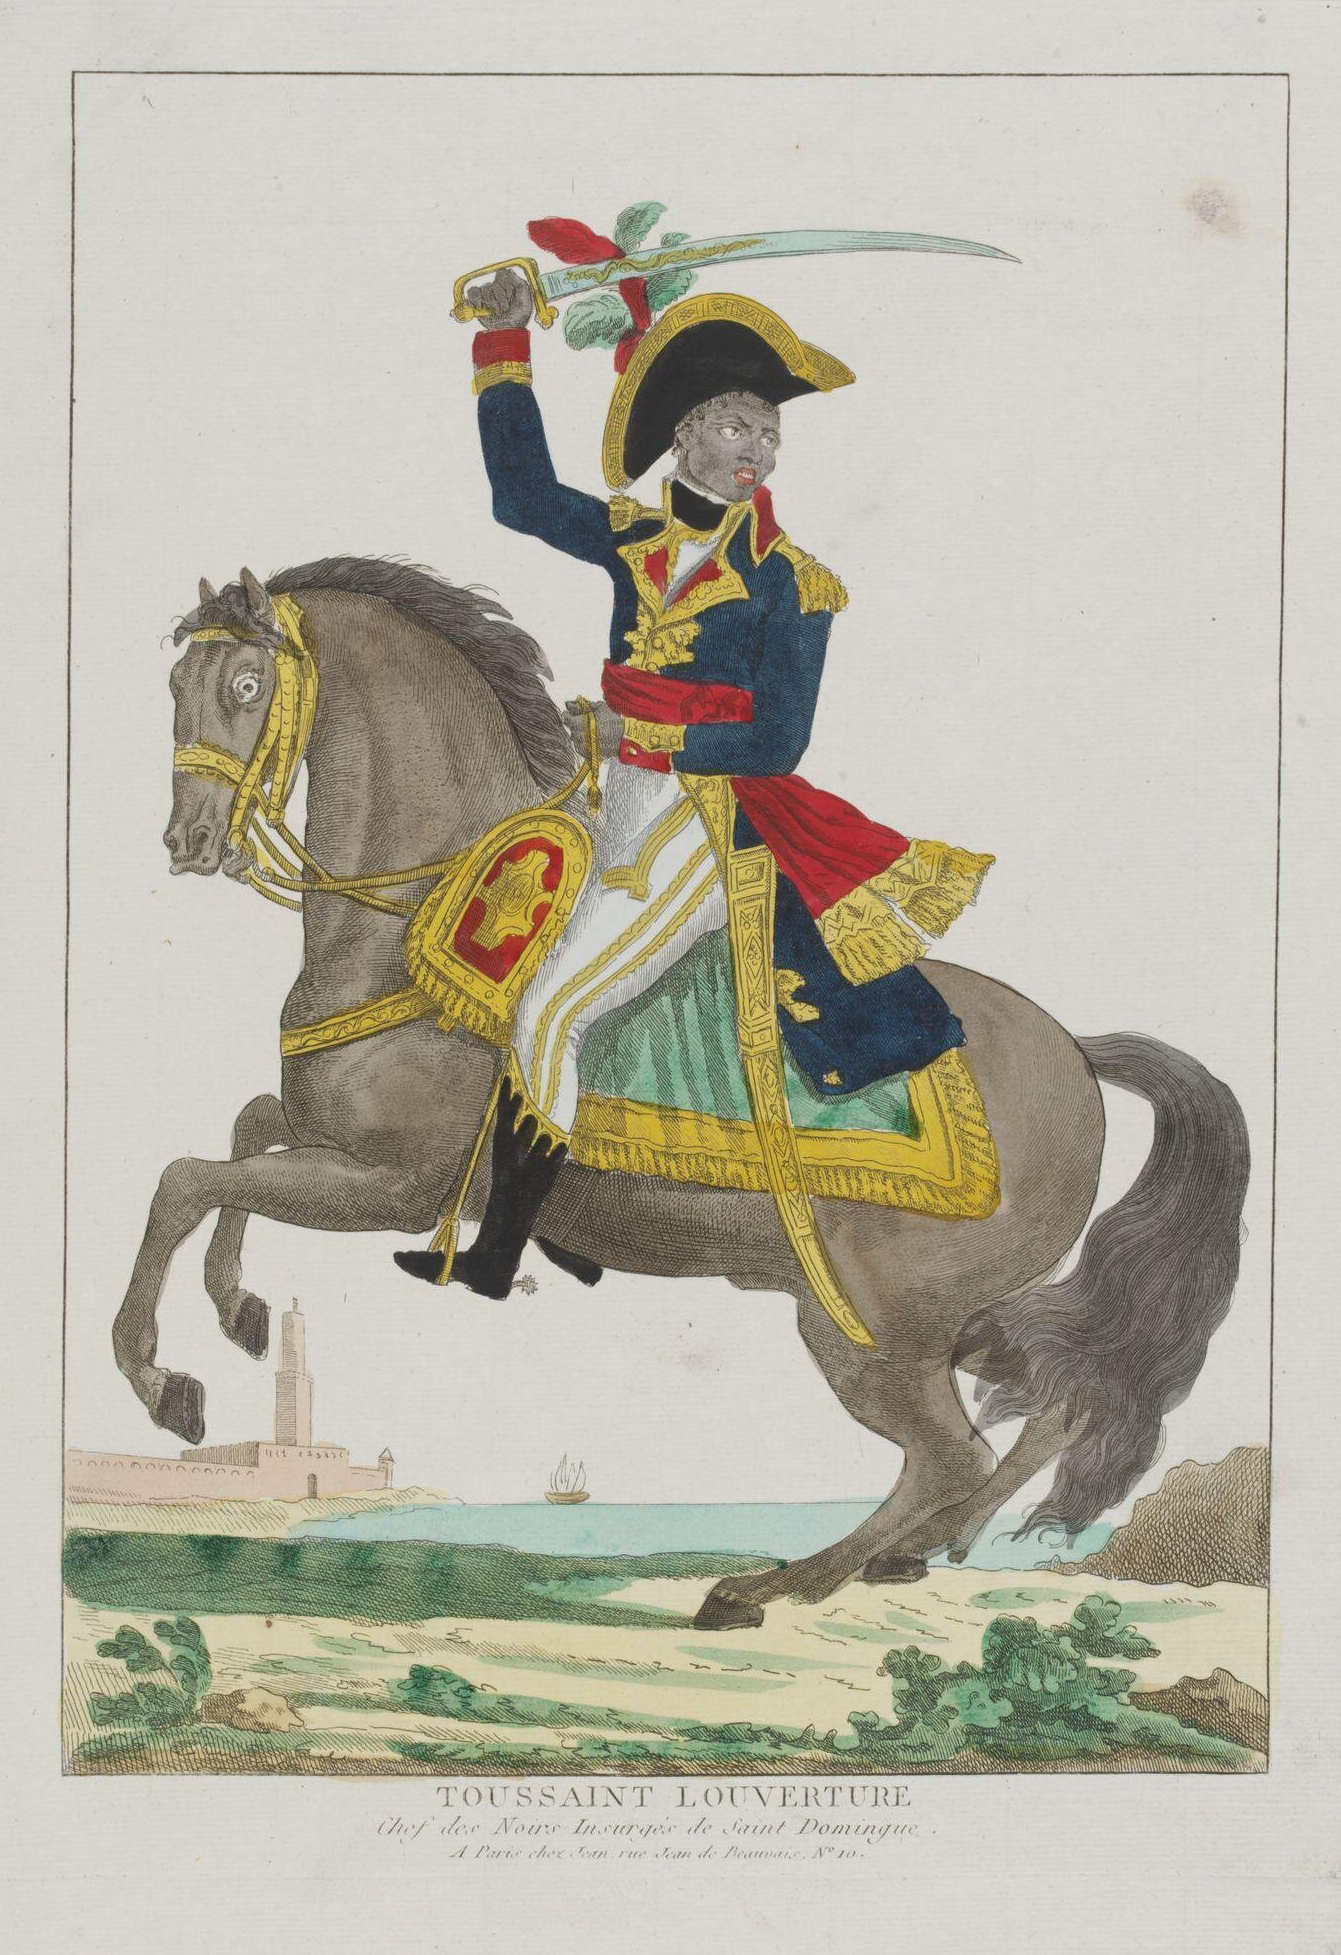 Illustration print of a man on a horse, wielding a sword.